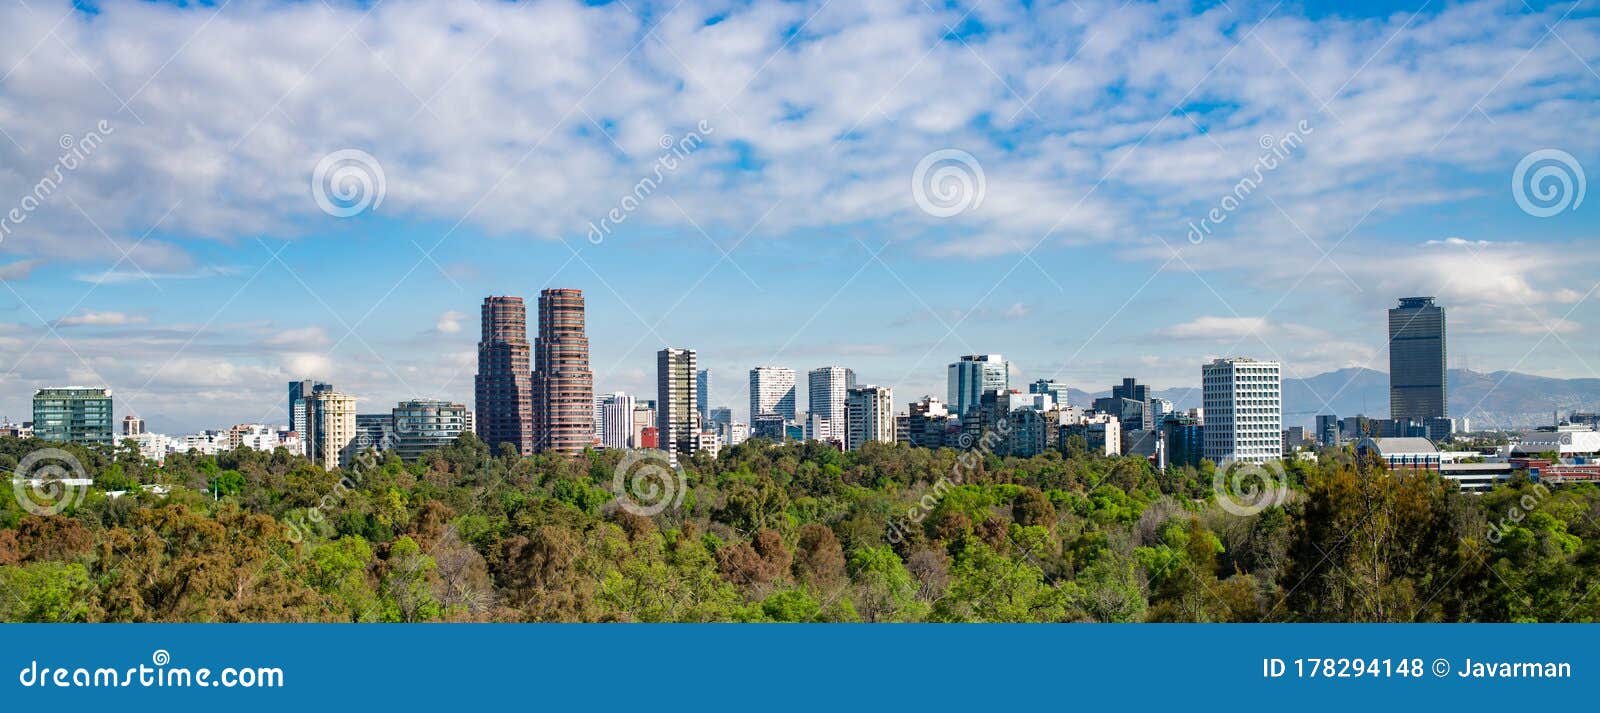 panoramic view of mexico city skyline on sunny day